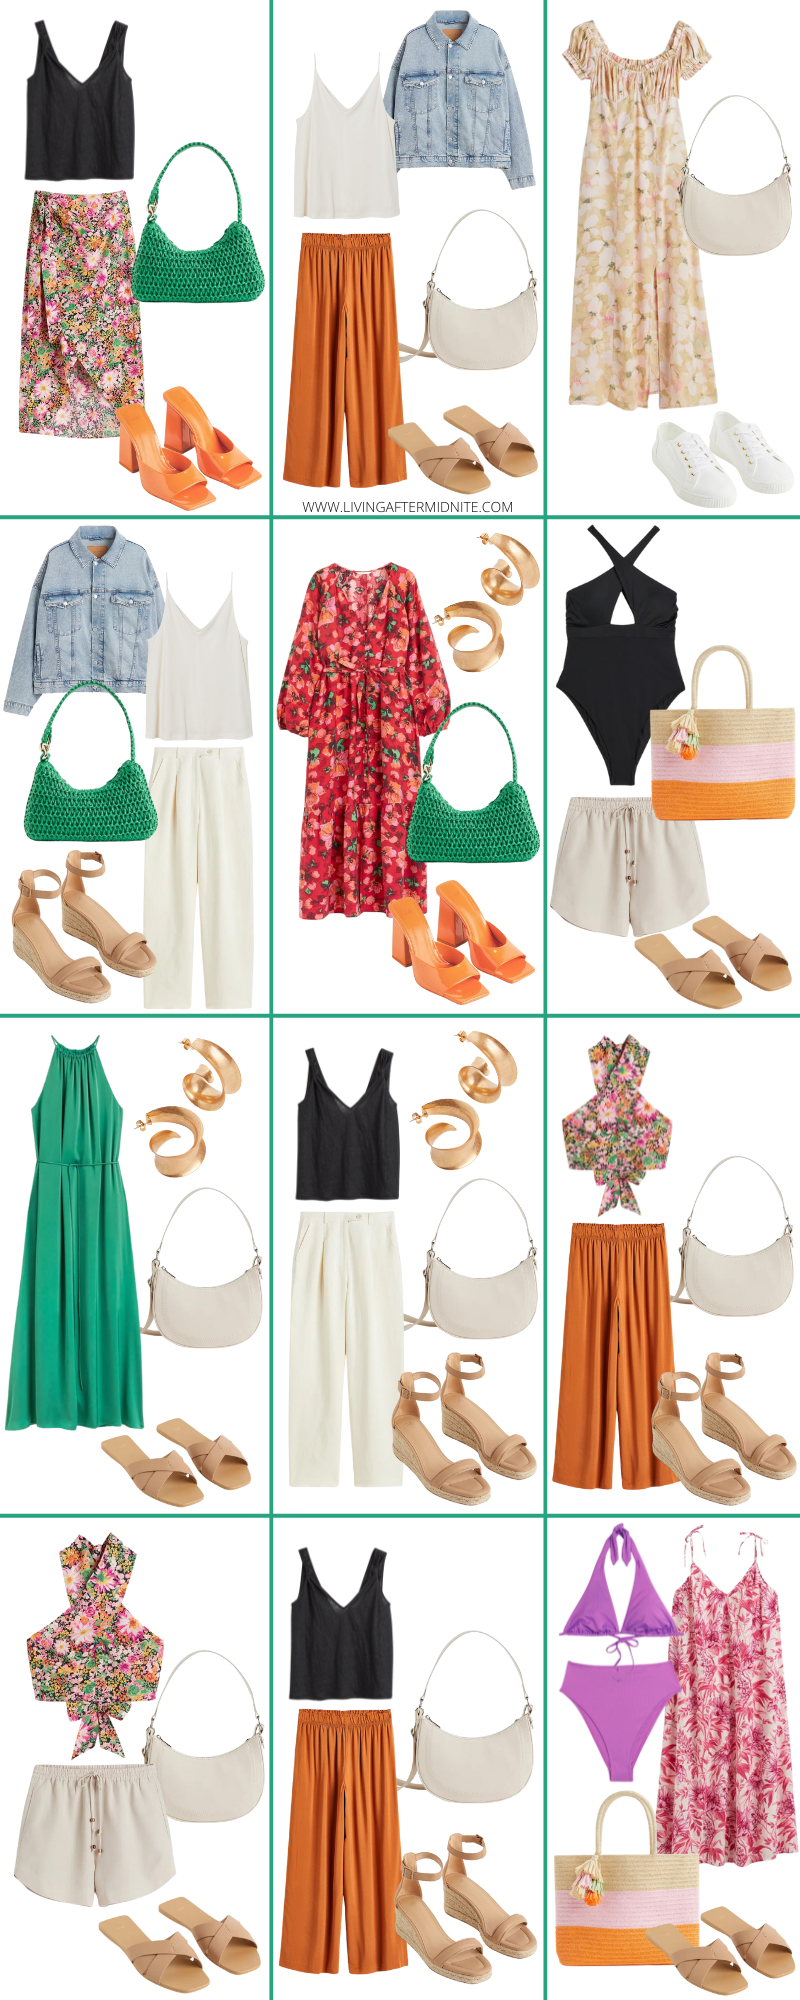 Affordable H&M Summer Capsule Wardrobe | 25 Pieces, 48+ Outfits | How to Build a Capsule Wardrobe | H&M Summer Clothes | Outfit Inspiration | Summer Fashion | 48 Warm Weather Outfit Ideas | Summer Vacation Packing Guide | Summer Outfits 2022 | Capsule Wardrobe 2022